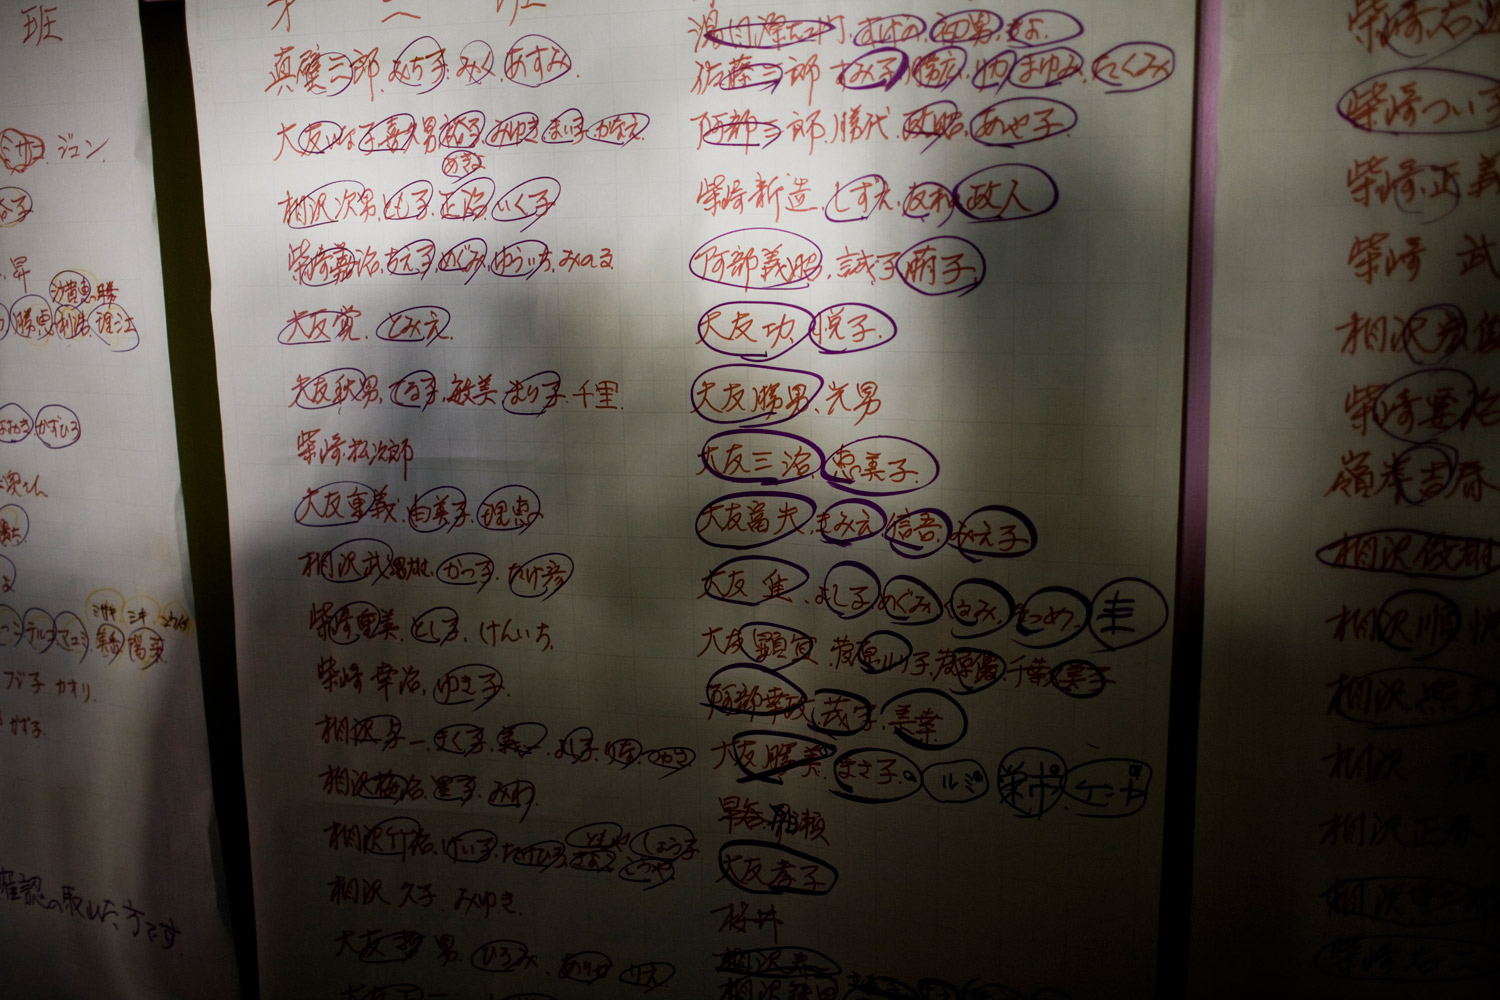 A list of survivors hangs in a school gymnasium in Natori on March 13, 2011